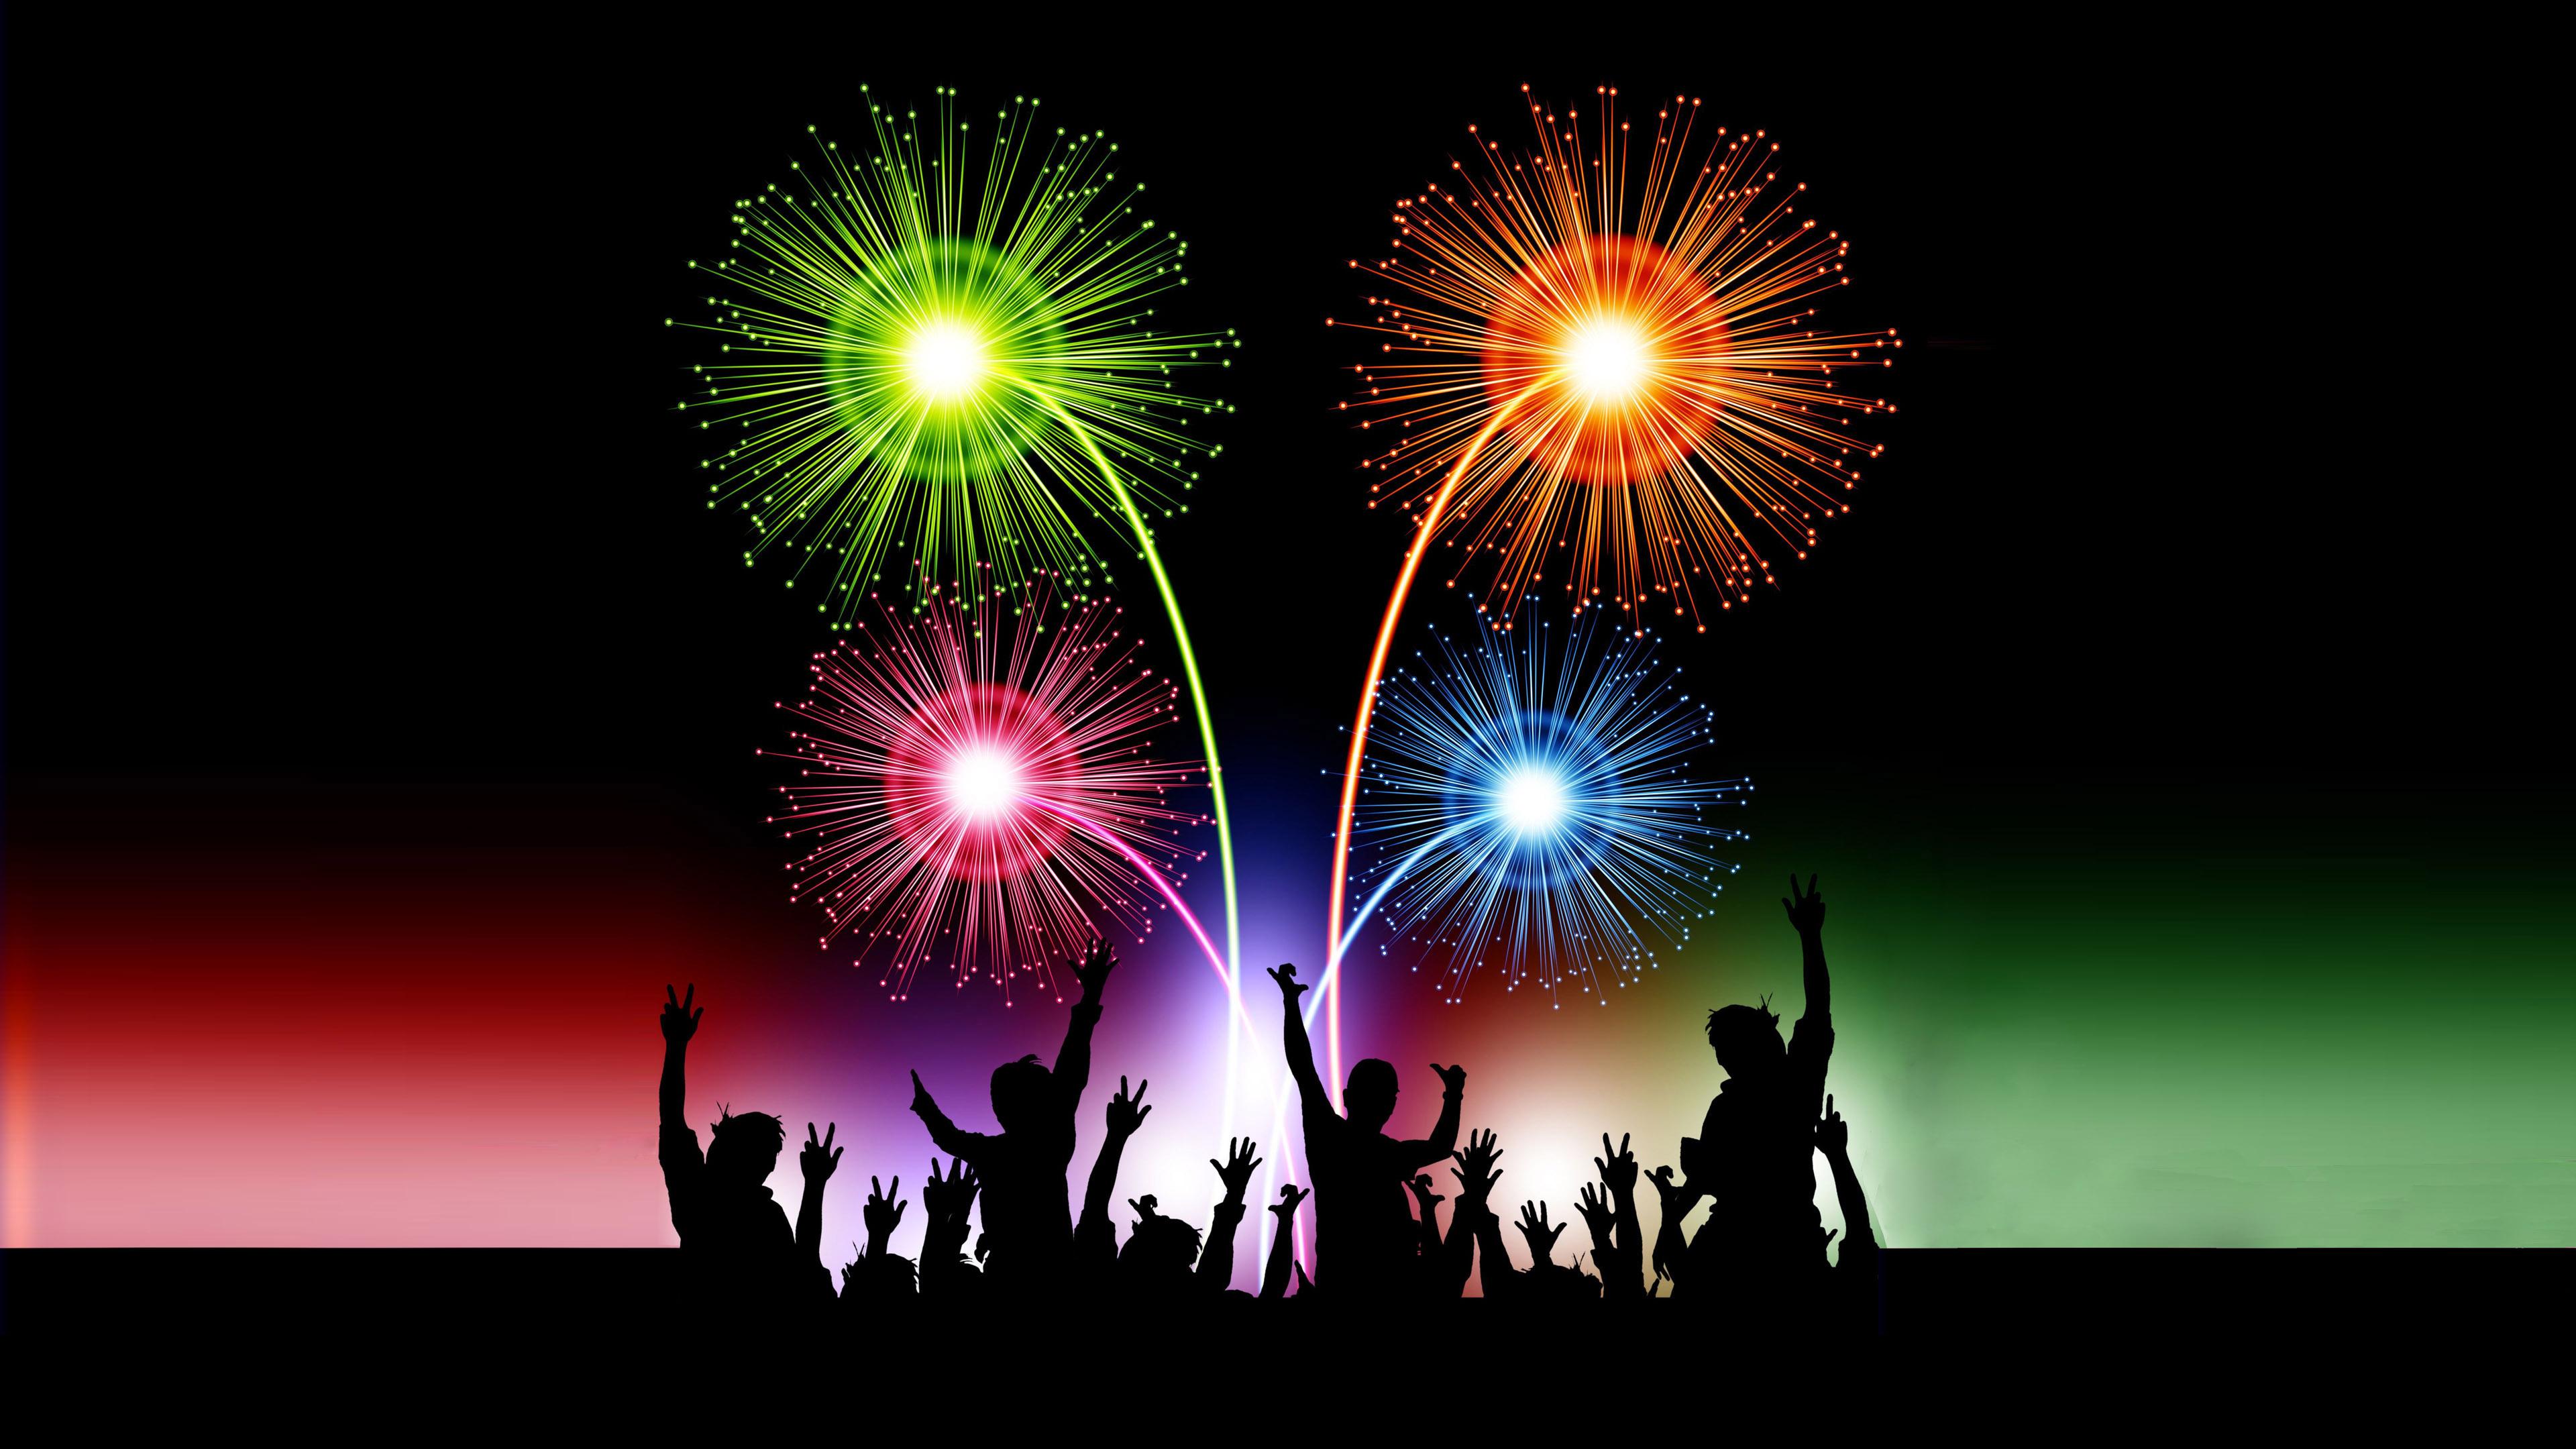 Fireworks New Years Eve 2020 Wallpapers - Wallpaper Cave New Years Fireworks Wallpaper 2015